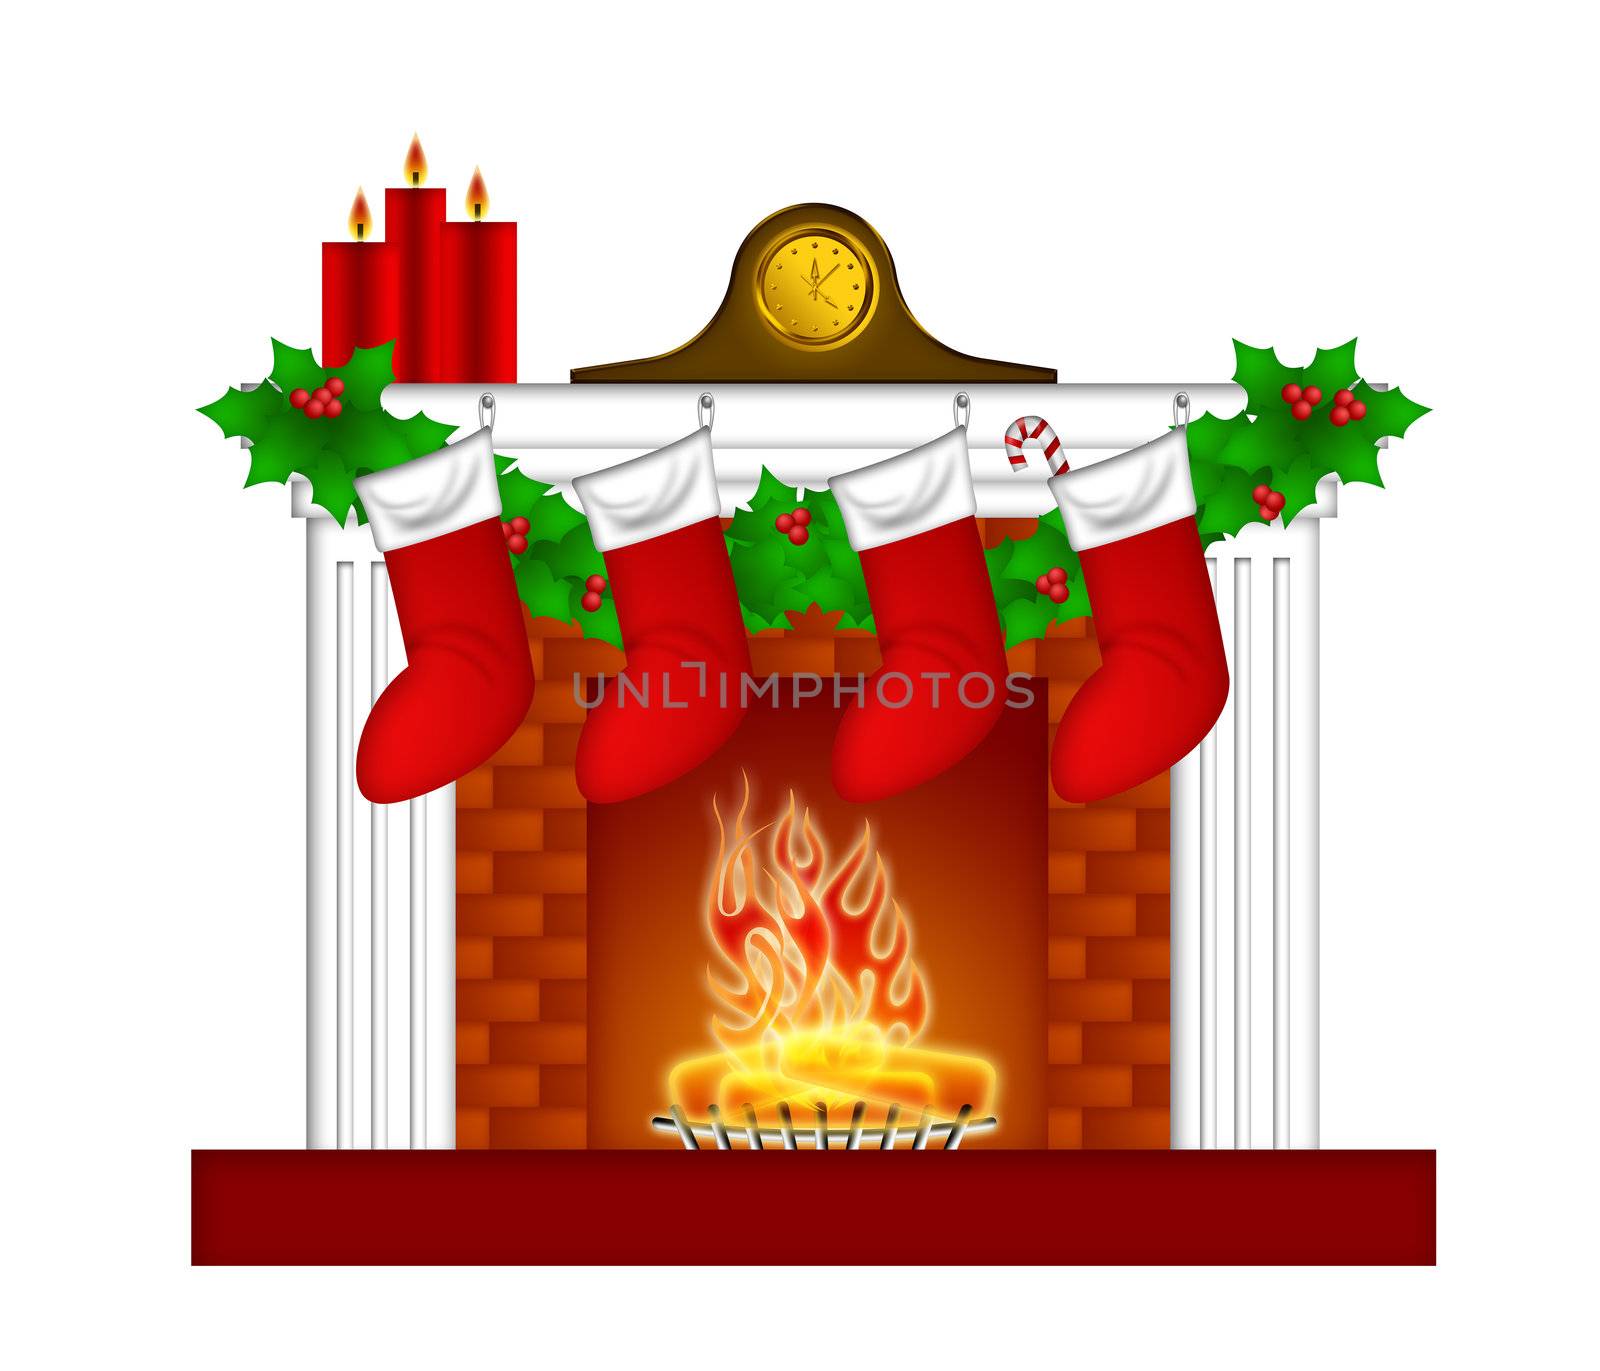 Fireplace Christmas Decoration with Garland Stocking Pillar Candles and Mantel Clock Illustration